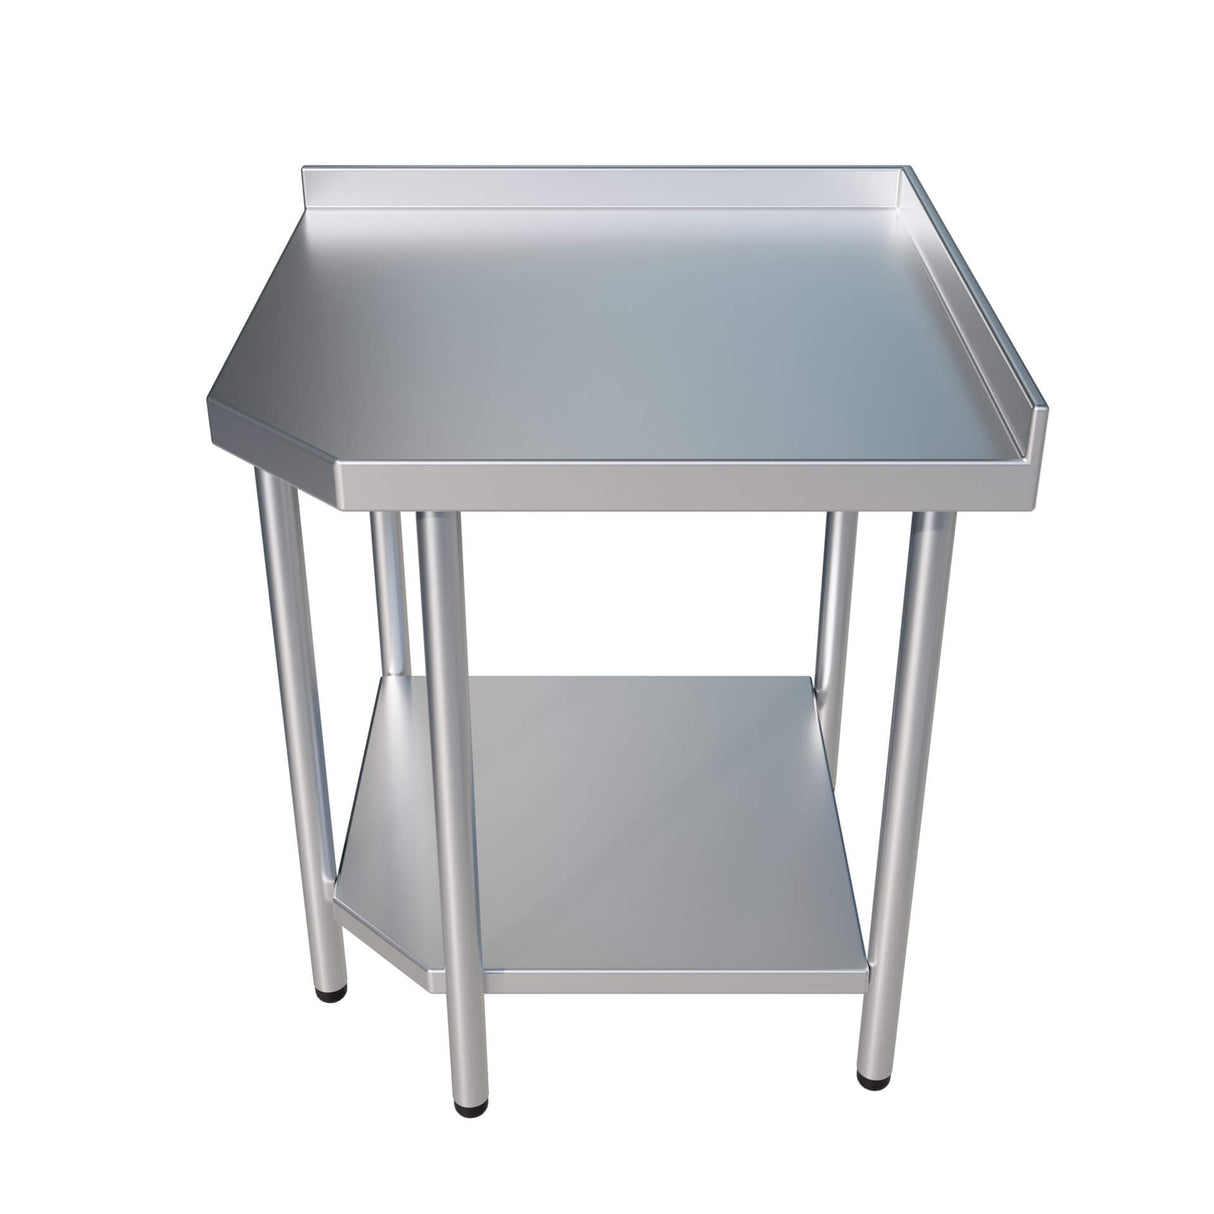 Empire Stainless Steel Corner Prep Table With Upstand - CORNER-1 Stainless Steel Corner Tables & Units Empire   